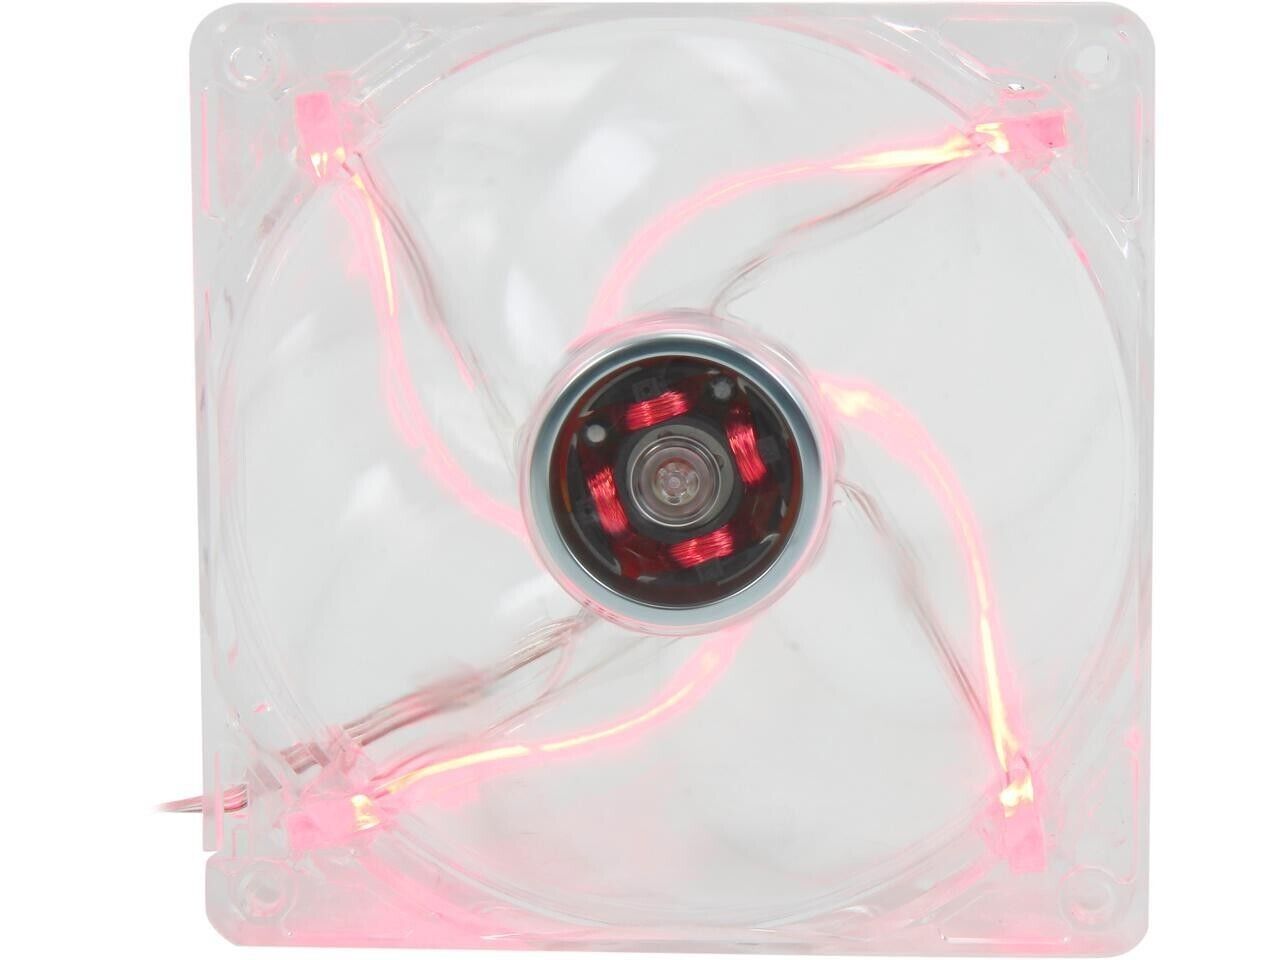 SAME DAY SHIP - NEW Rosewill 120mm Cooling Fan with Red LED RFTL-131209R